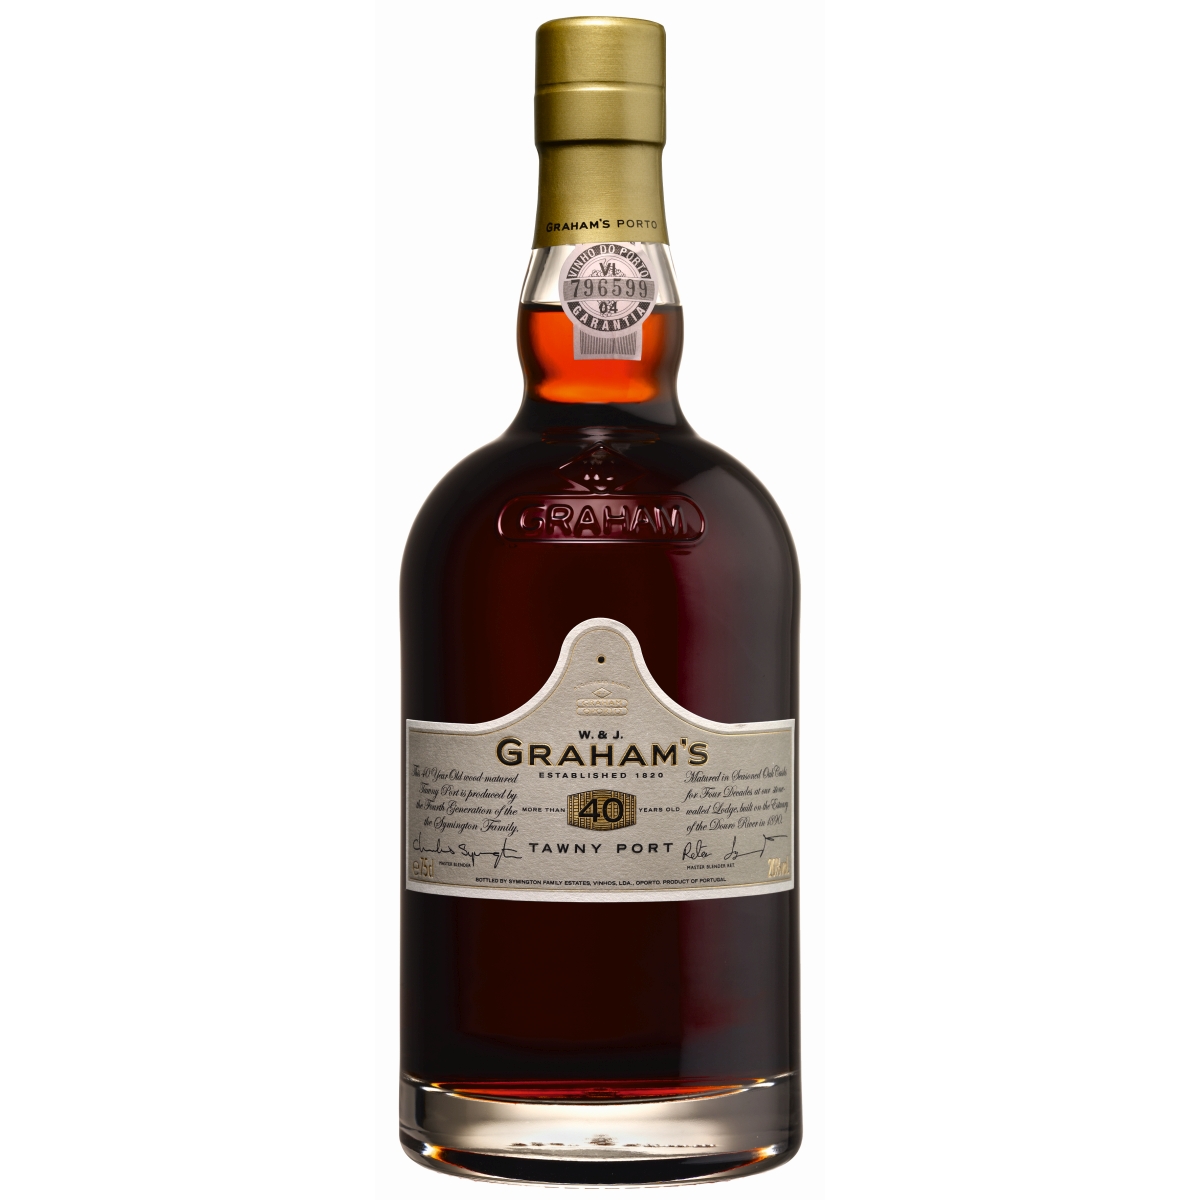 GRAHAM’S Port 40 Year Old Tawny | 75cl